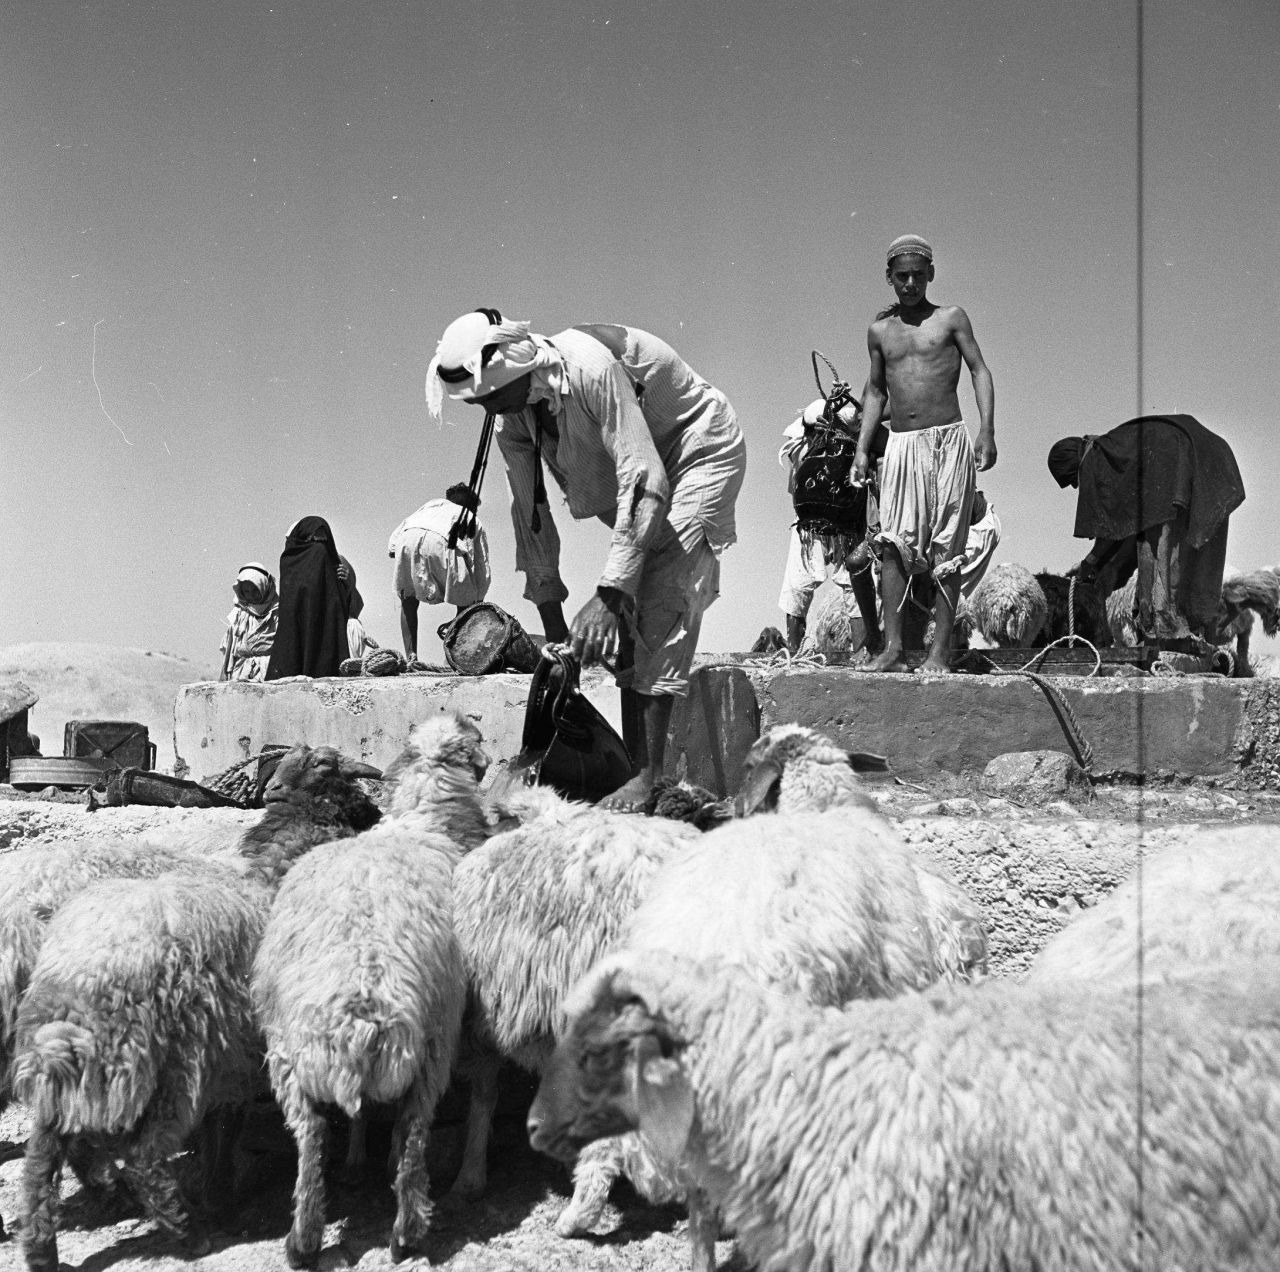 ‘Bedouins Come to the Market in Be’er Sheva’ (1955). Source: Eddie Hirschbein Collection, National Library of Israel. Public domain via Wikimedia Commons.